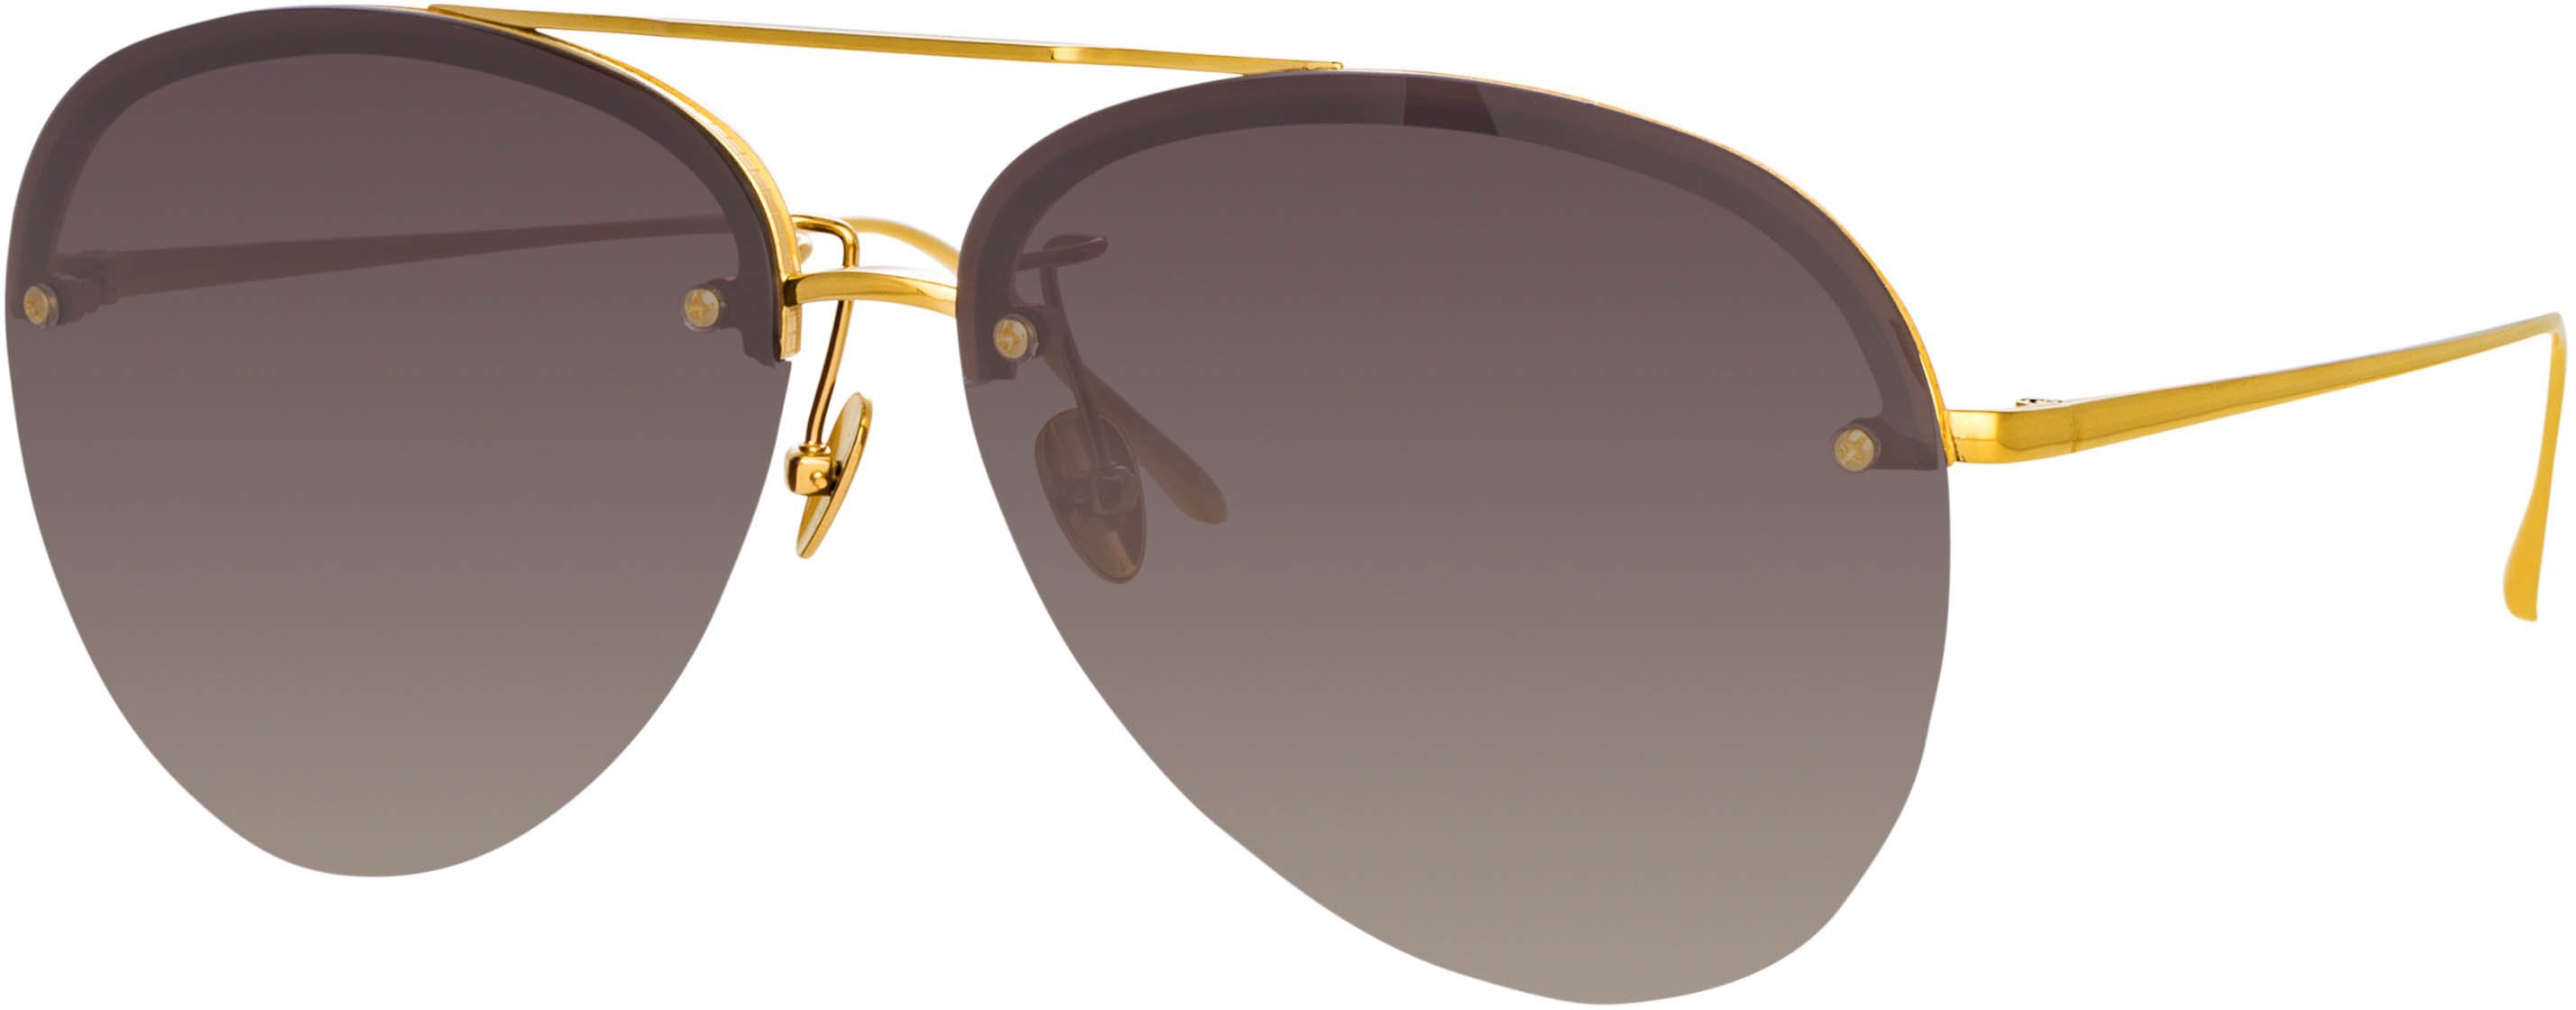 Dee Aviator Sunglasses in Yellow Gold and Green by LINDA FARROW